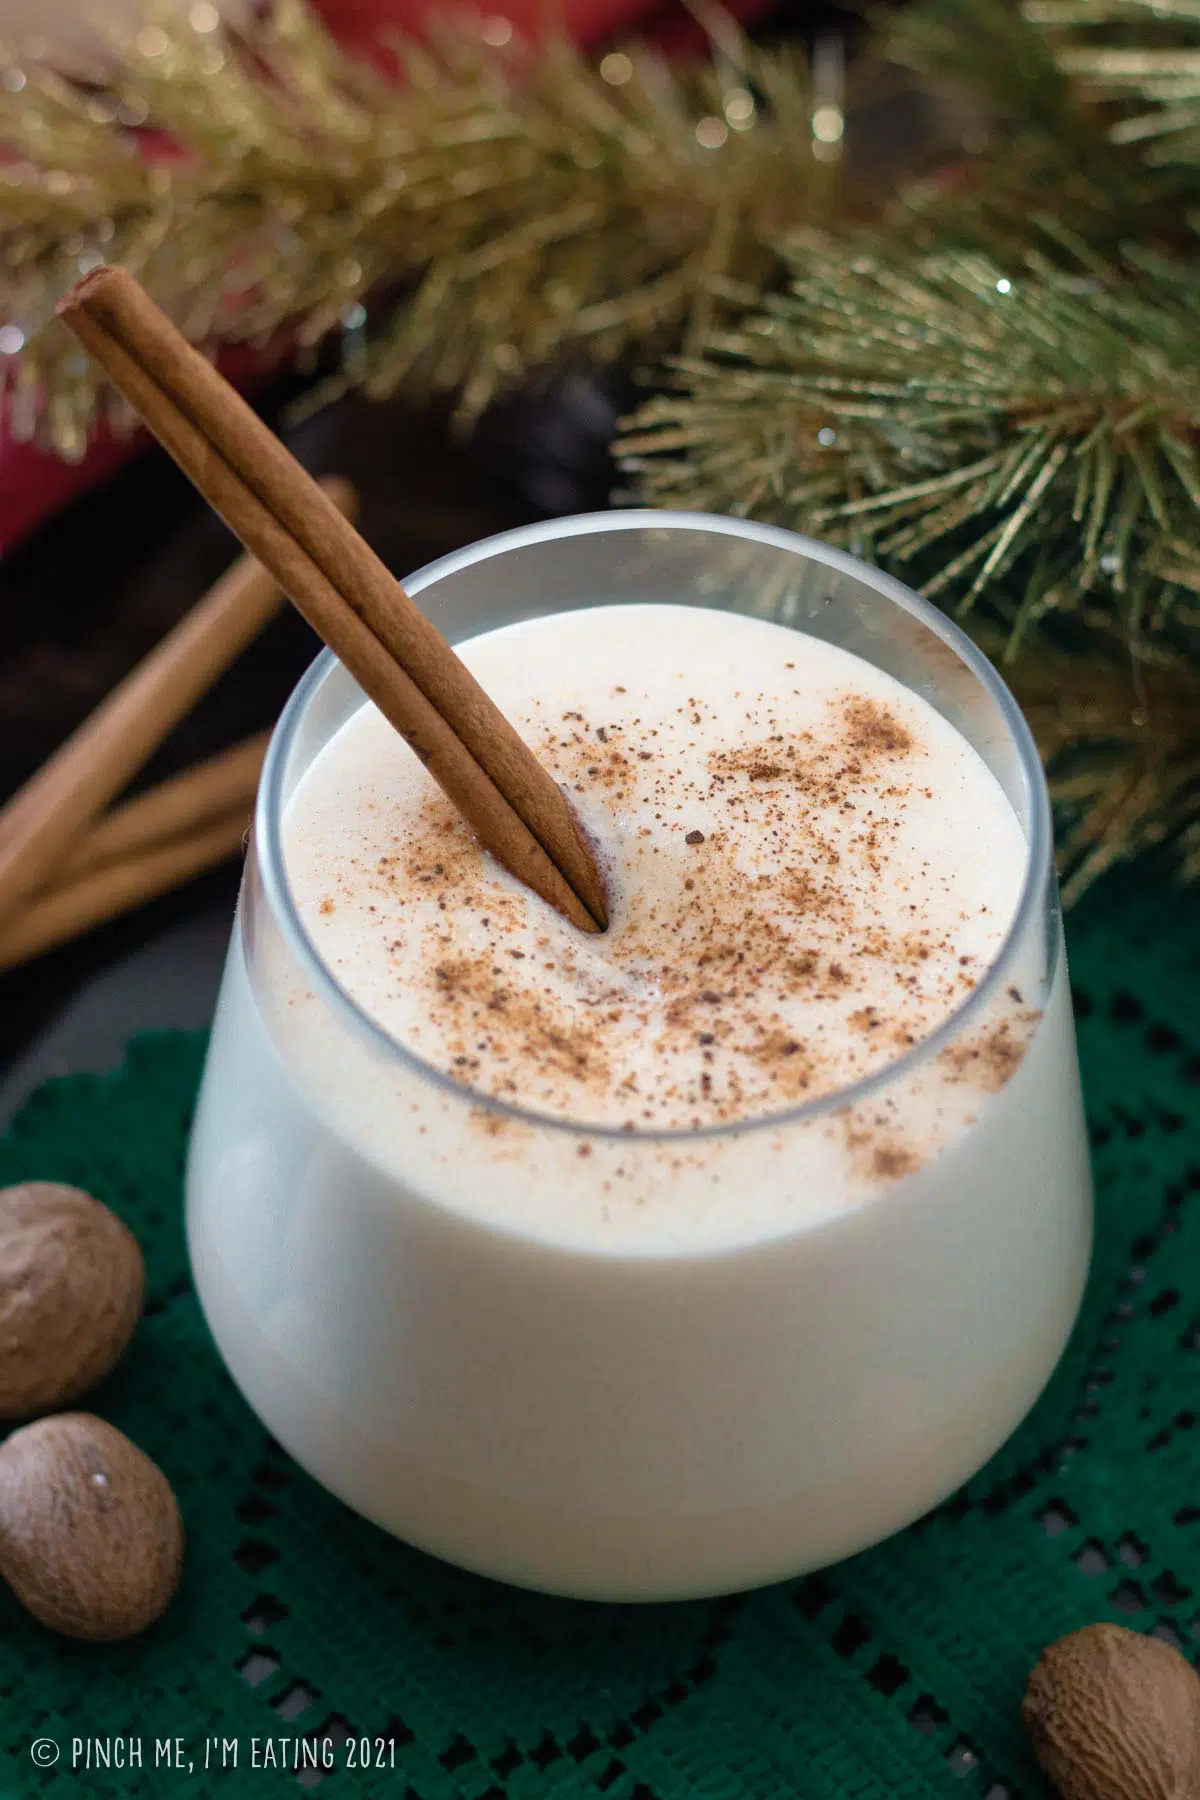 Glass of homemade eggnog with cinnamon stick, topped with ground nutmeg. Whole nutmeg is in the foreground and evergreen branch is in the background.